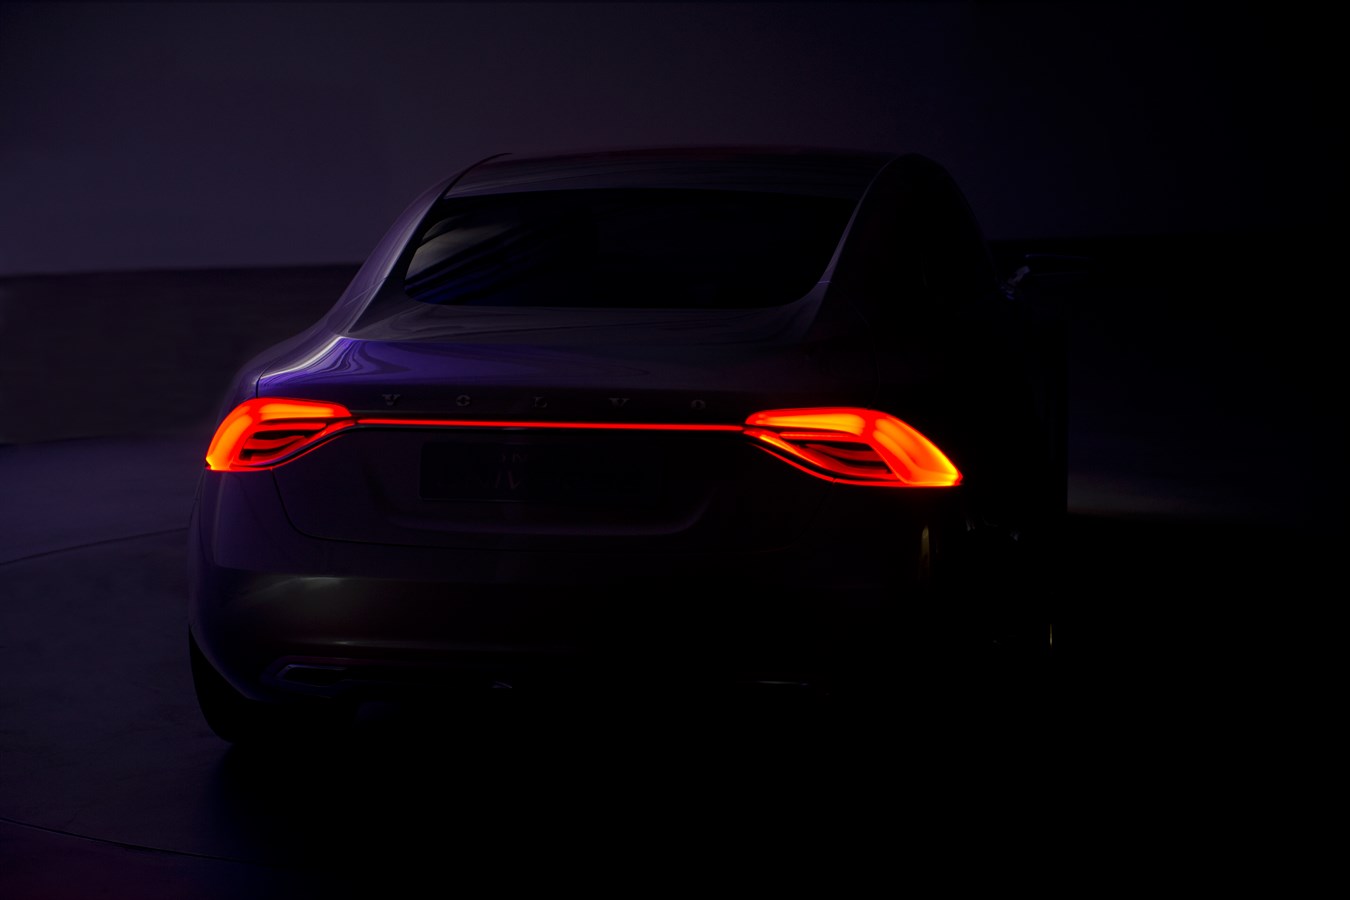 Volvo Concept Universe, rear lights in the dark (1 of 2 images showing the lights)